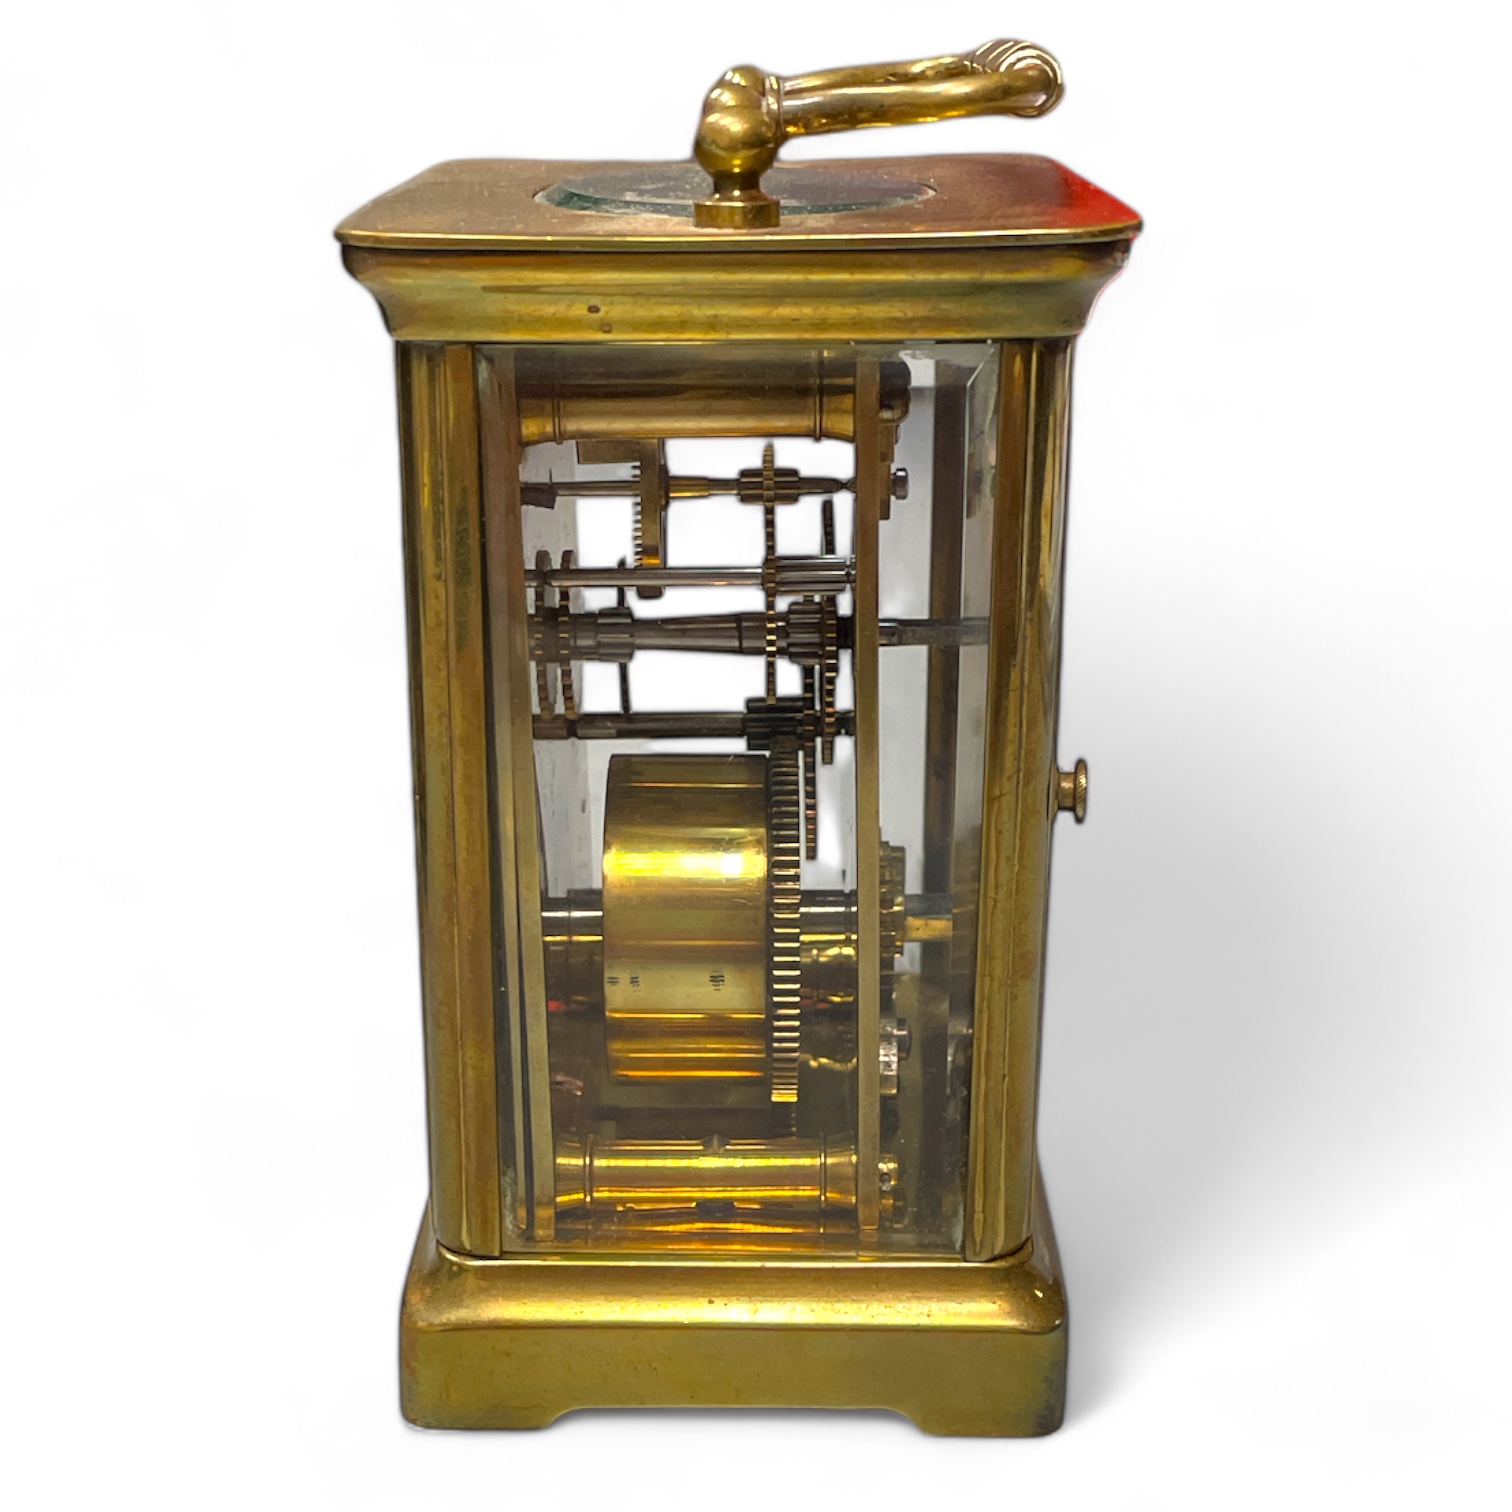 A brass carriage clock, 12cm tall with handle down in an associated leather case, in running order. - Image 3 of 3